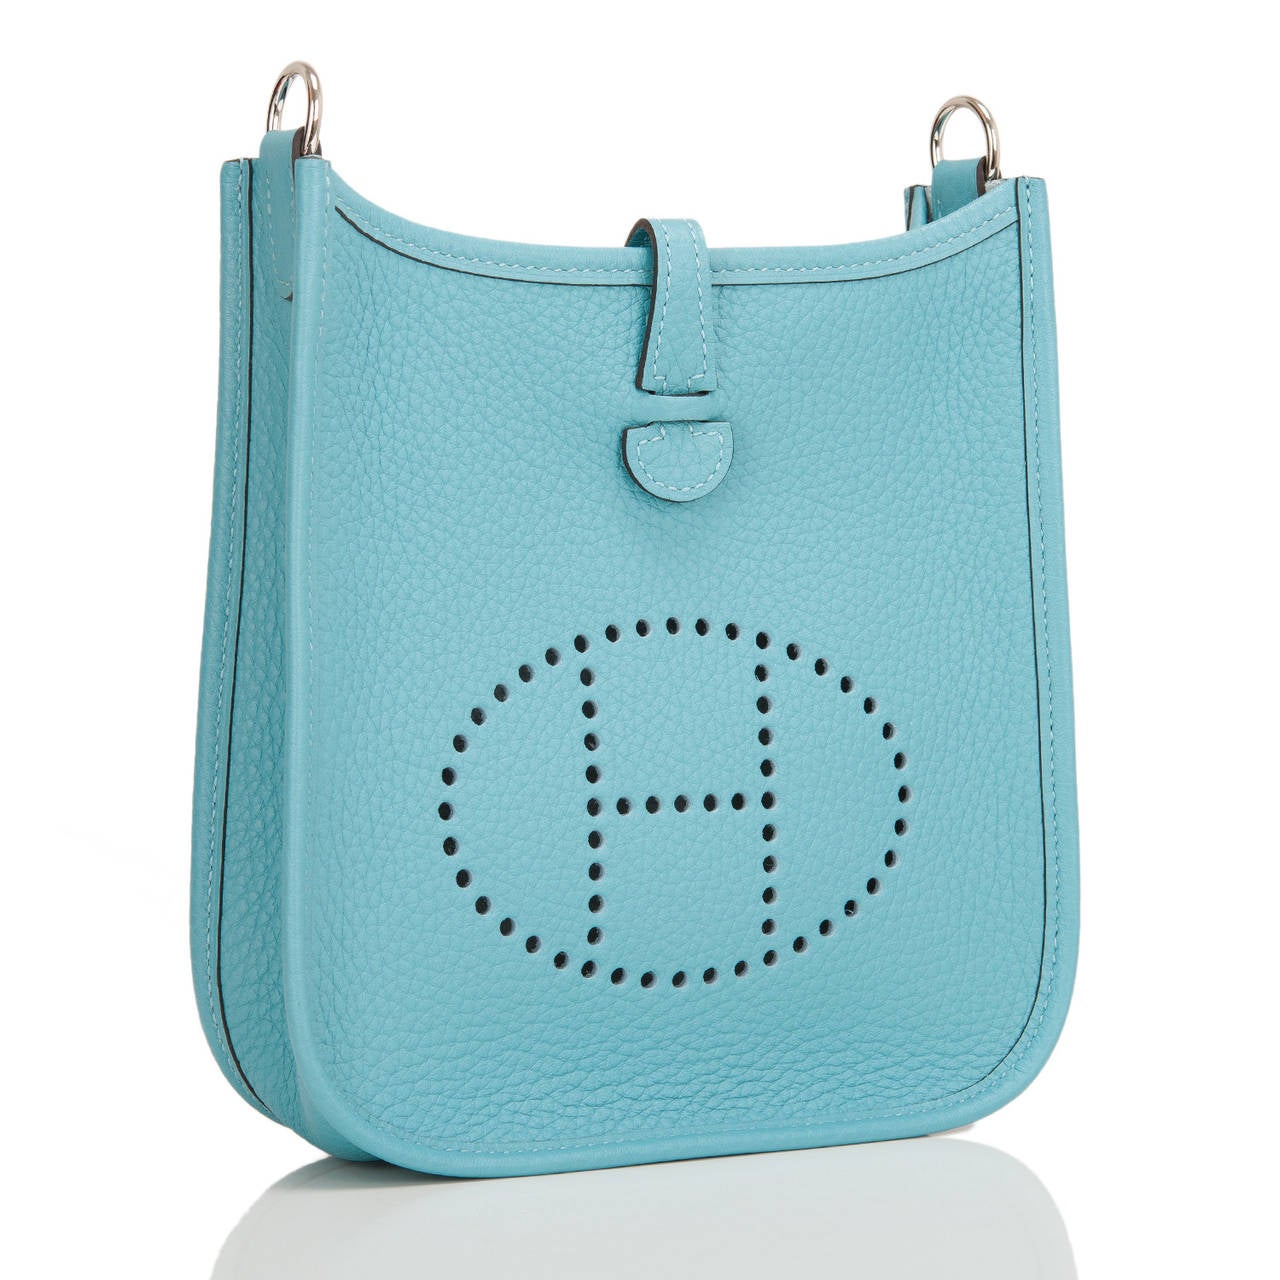 Hermes Blue Saint Cyr Evelyne TPM in clemence leather with palladium hardware.

This Evelyne III features Blue Saint Cyr clemence leather with palladium hardware, tonal stitching, large perforated H icon in circle at front, rear pocket, a pull tab